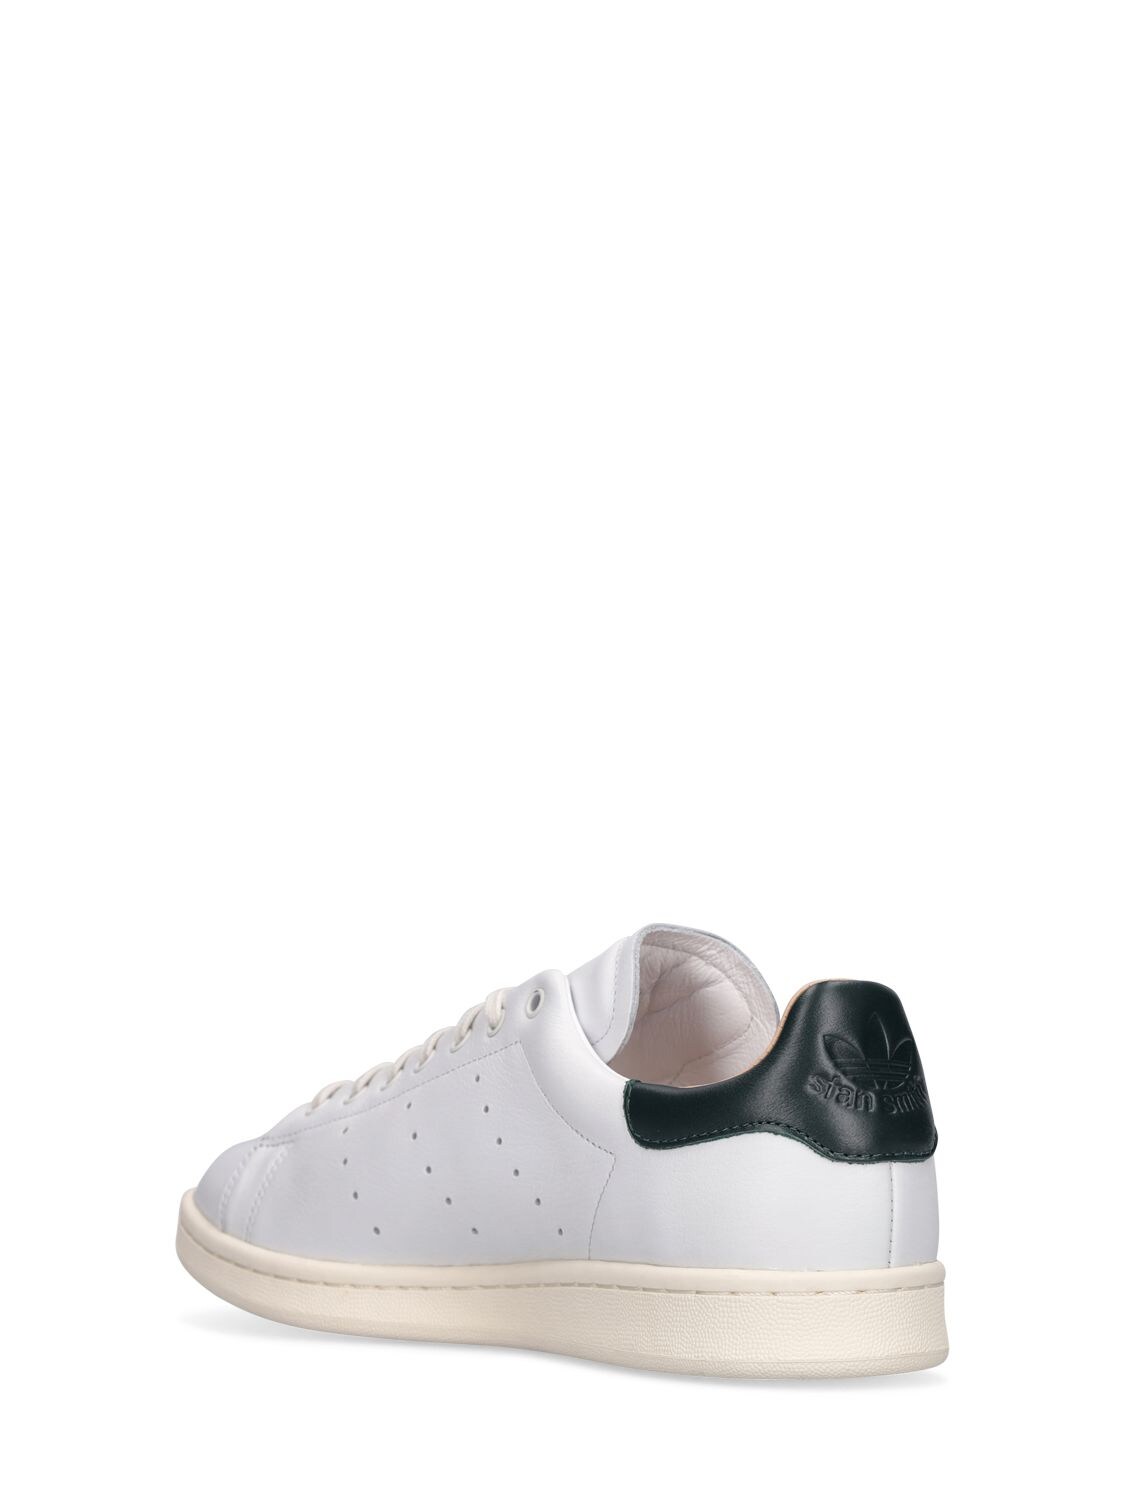 Men's shoes adidas Stan Smith Lux Crystal White/ Off White/ Core